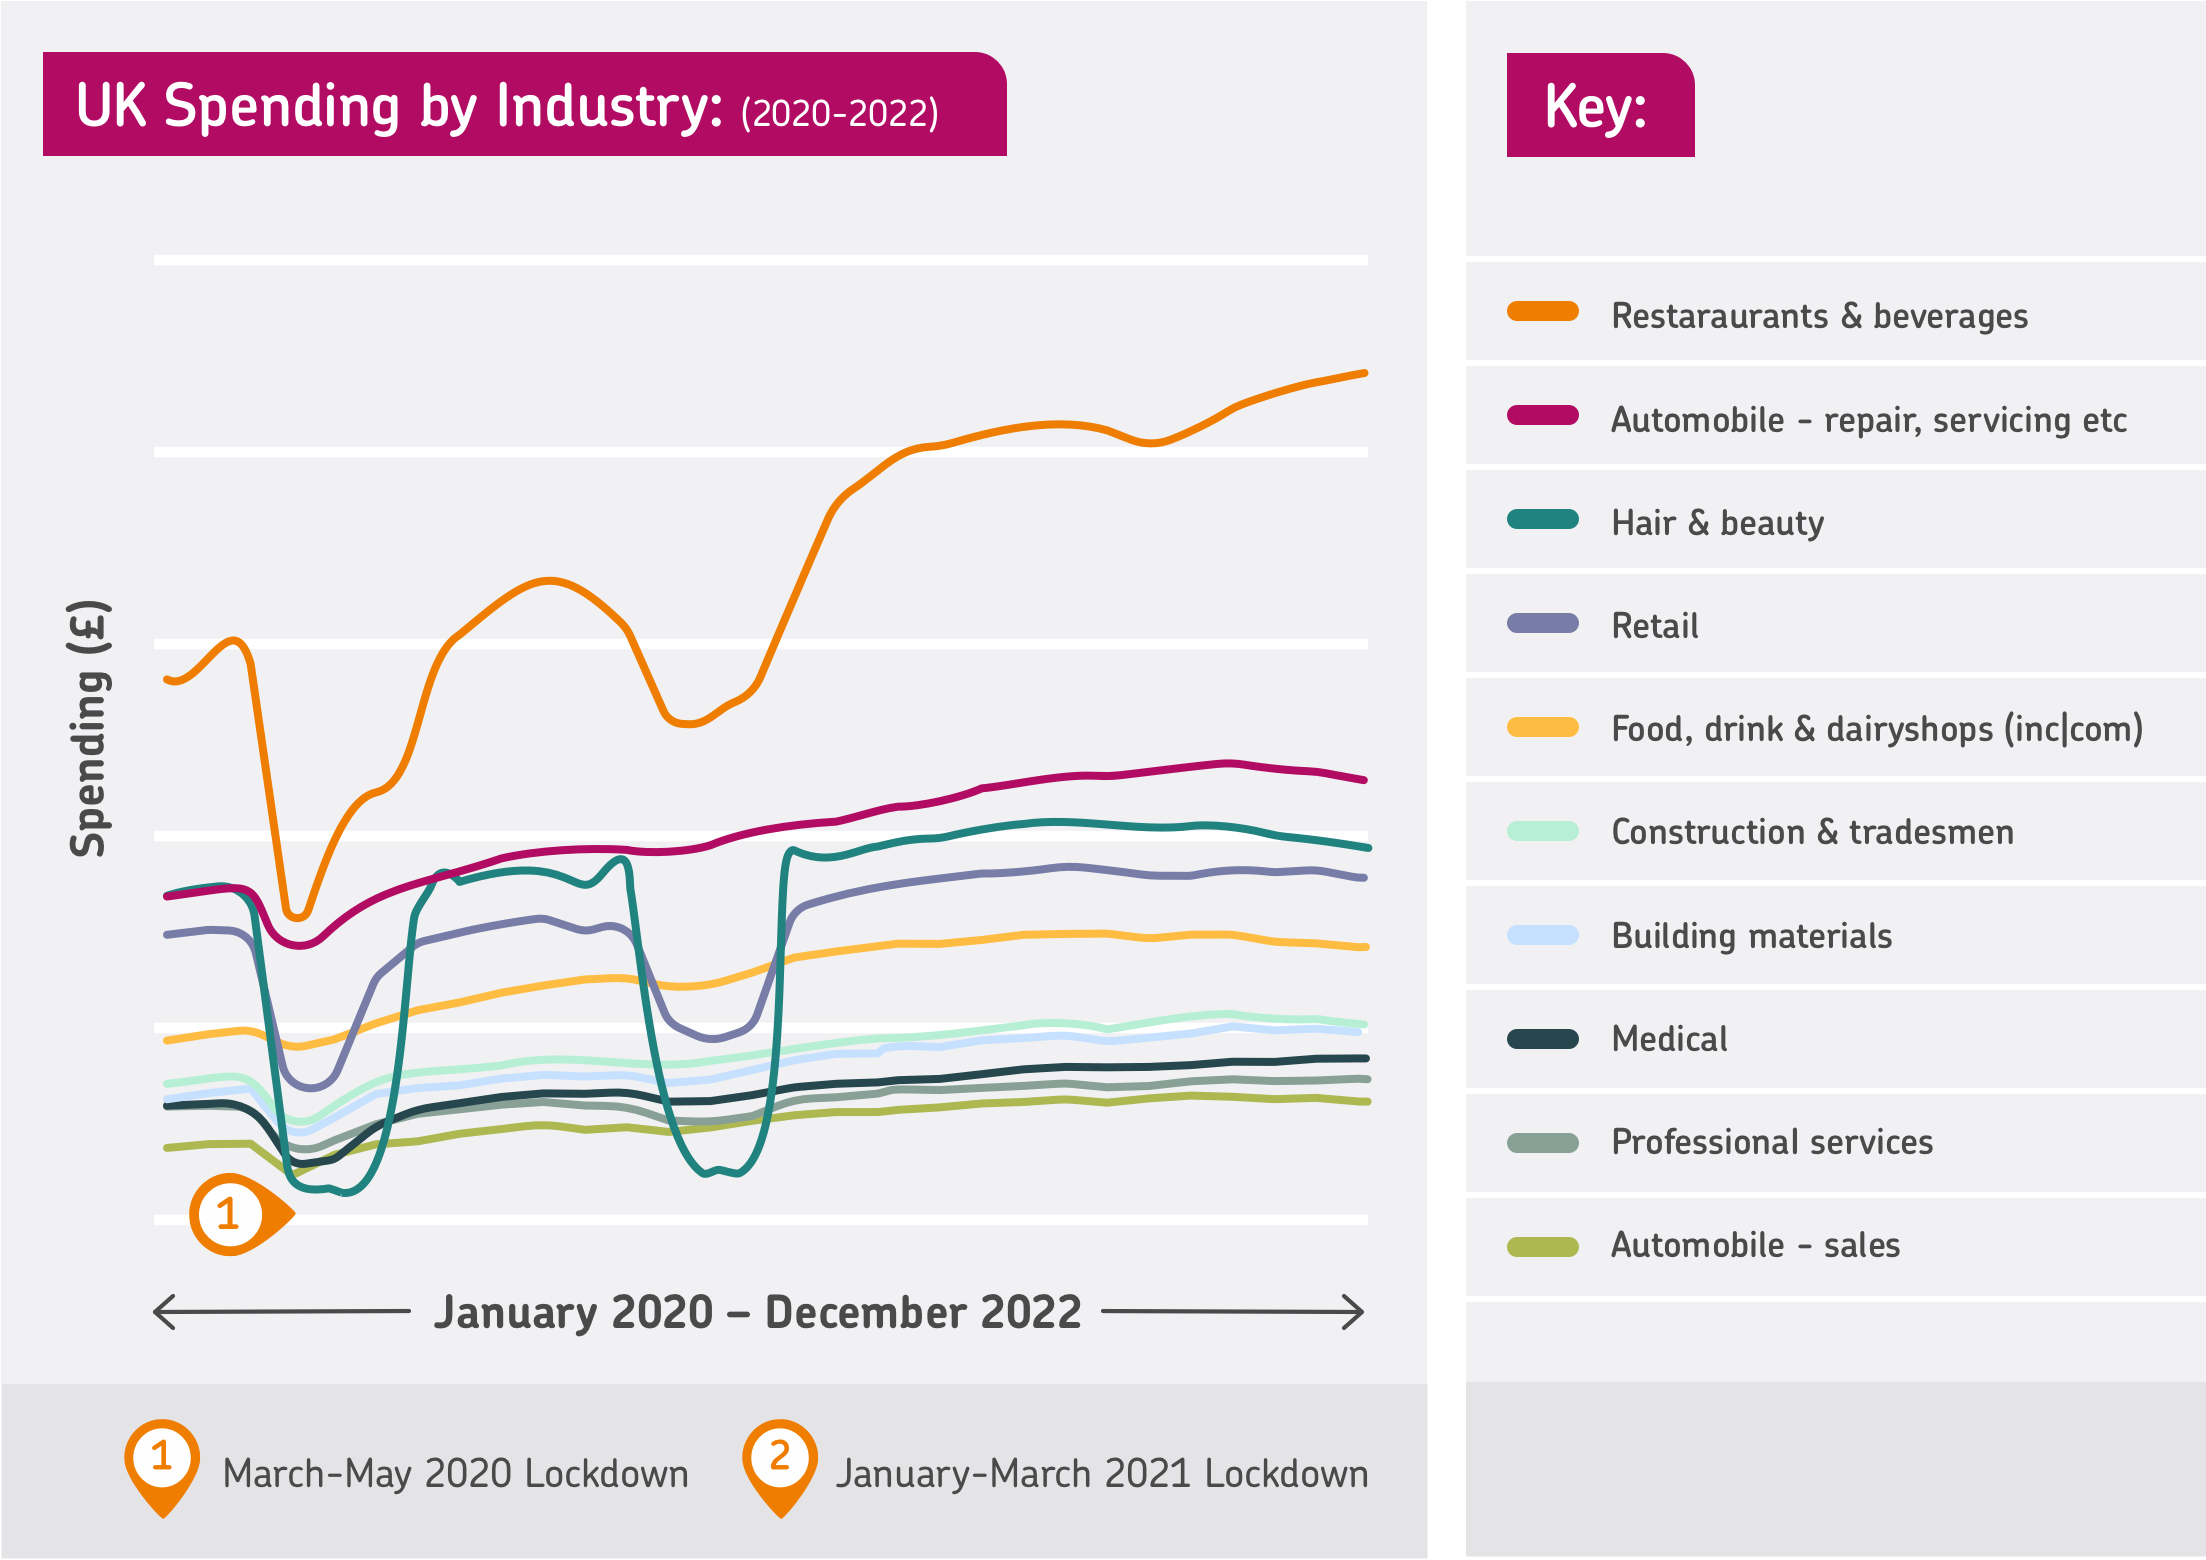 Graph displaying spending data by industry from January 2020 to December 2022